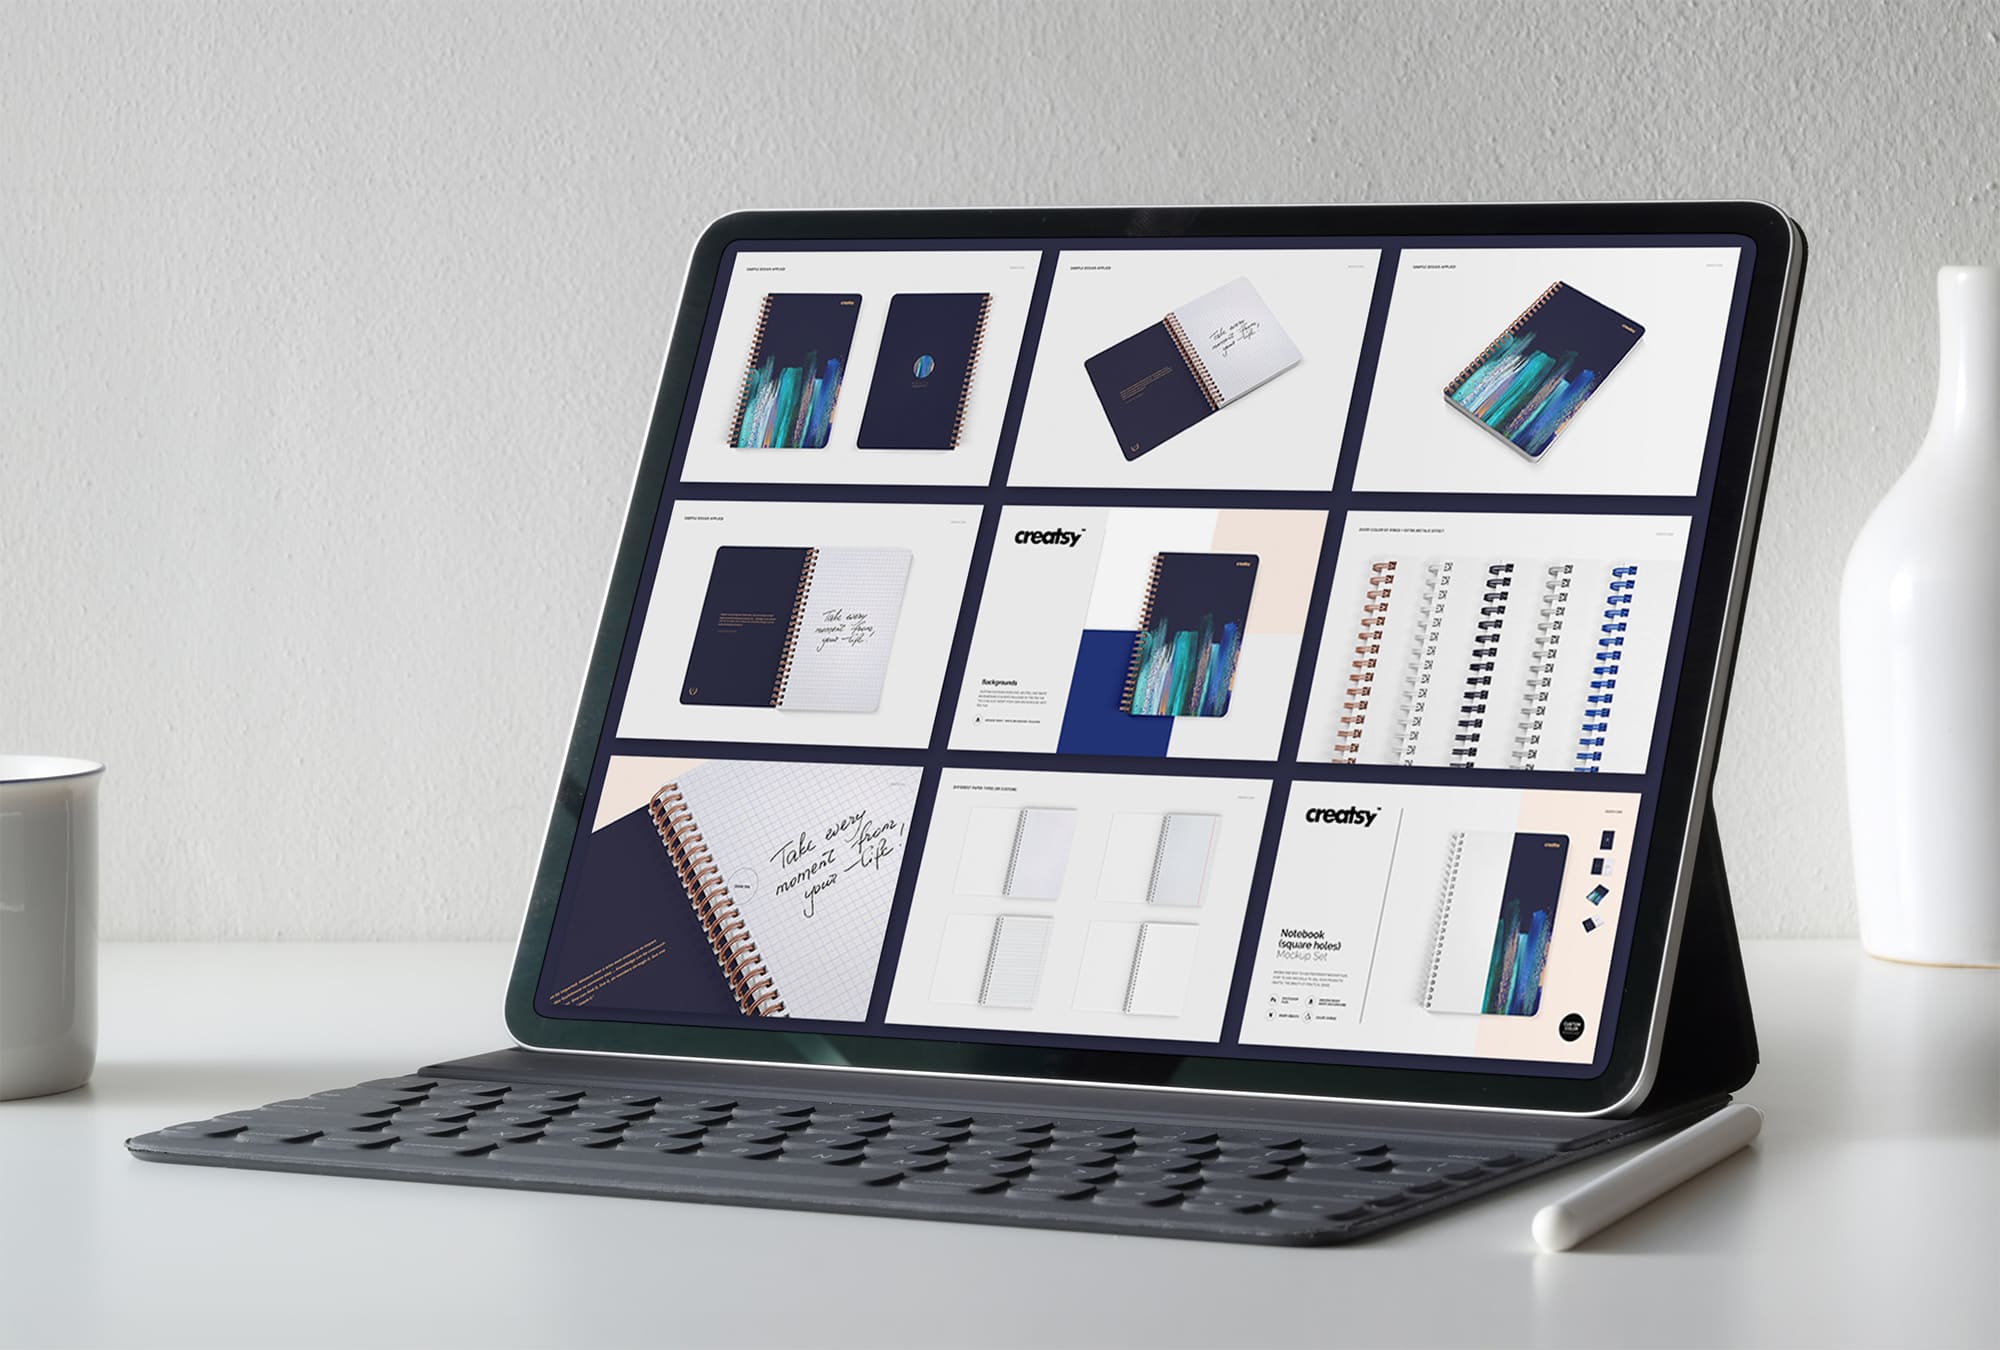 Tablet on screen with images of lovely spiral notebook mockup.